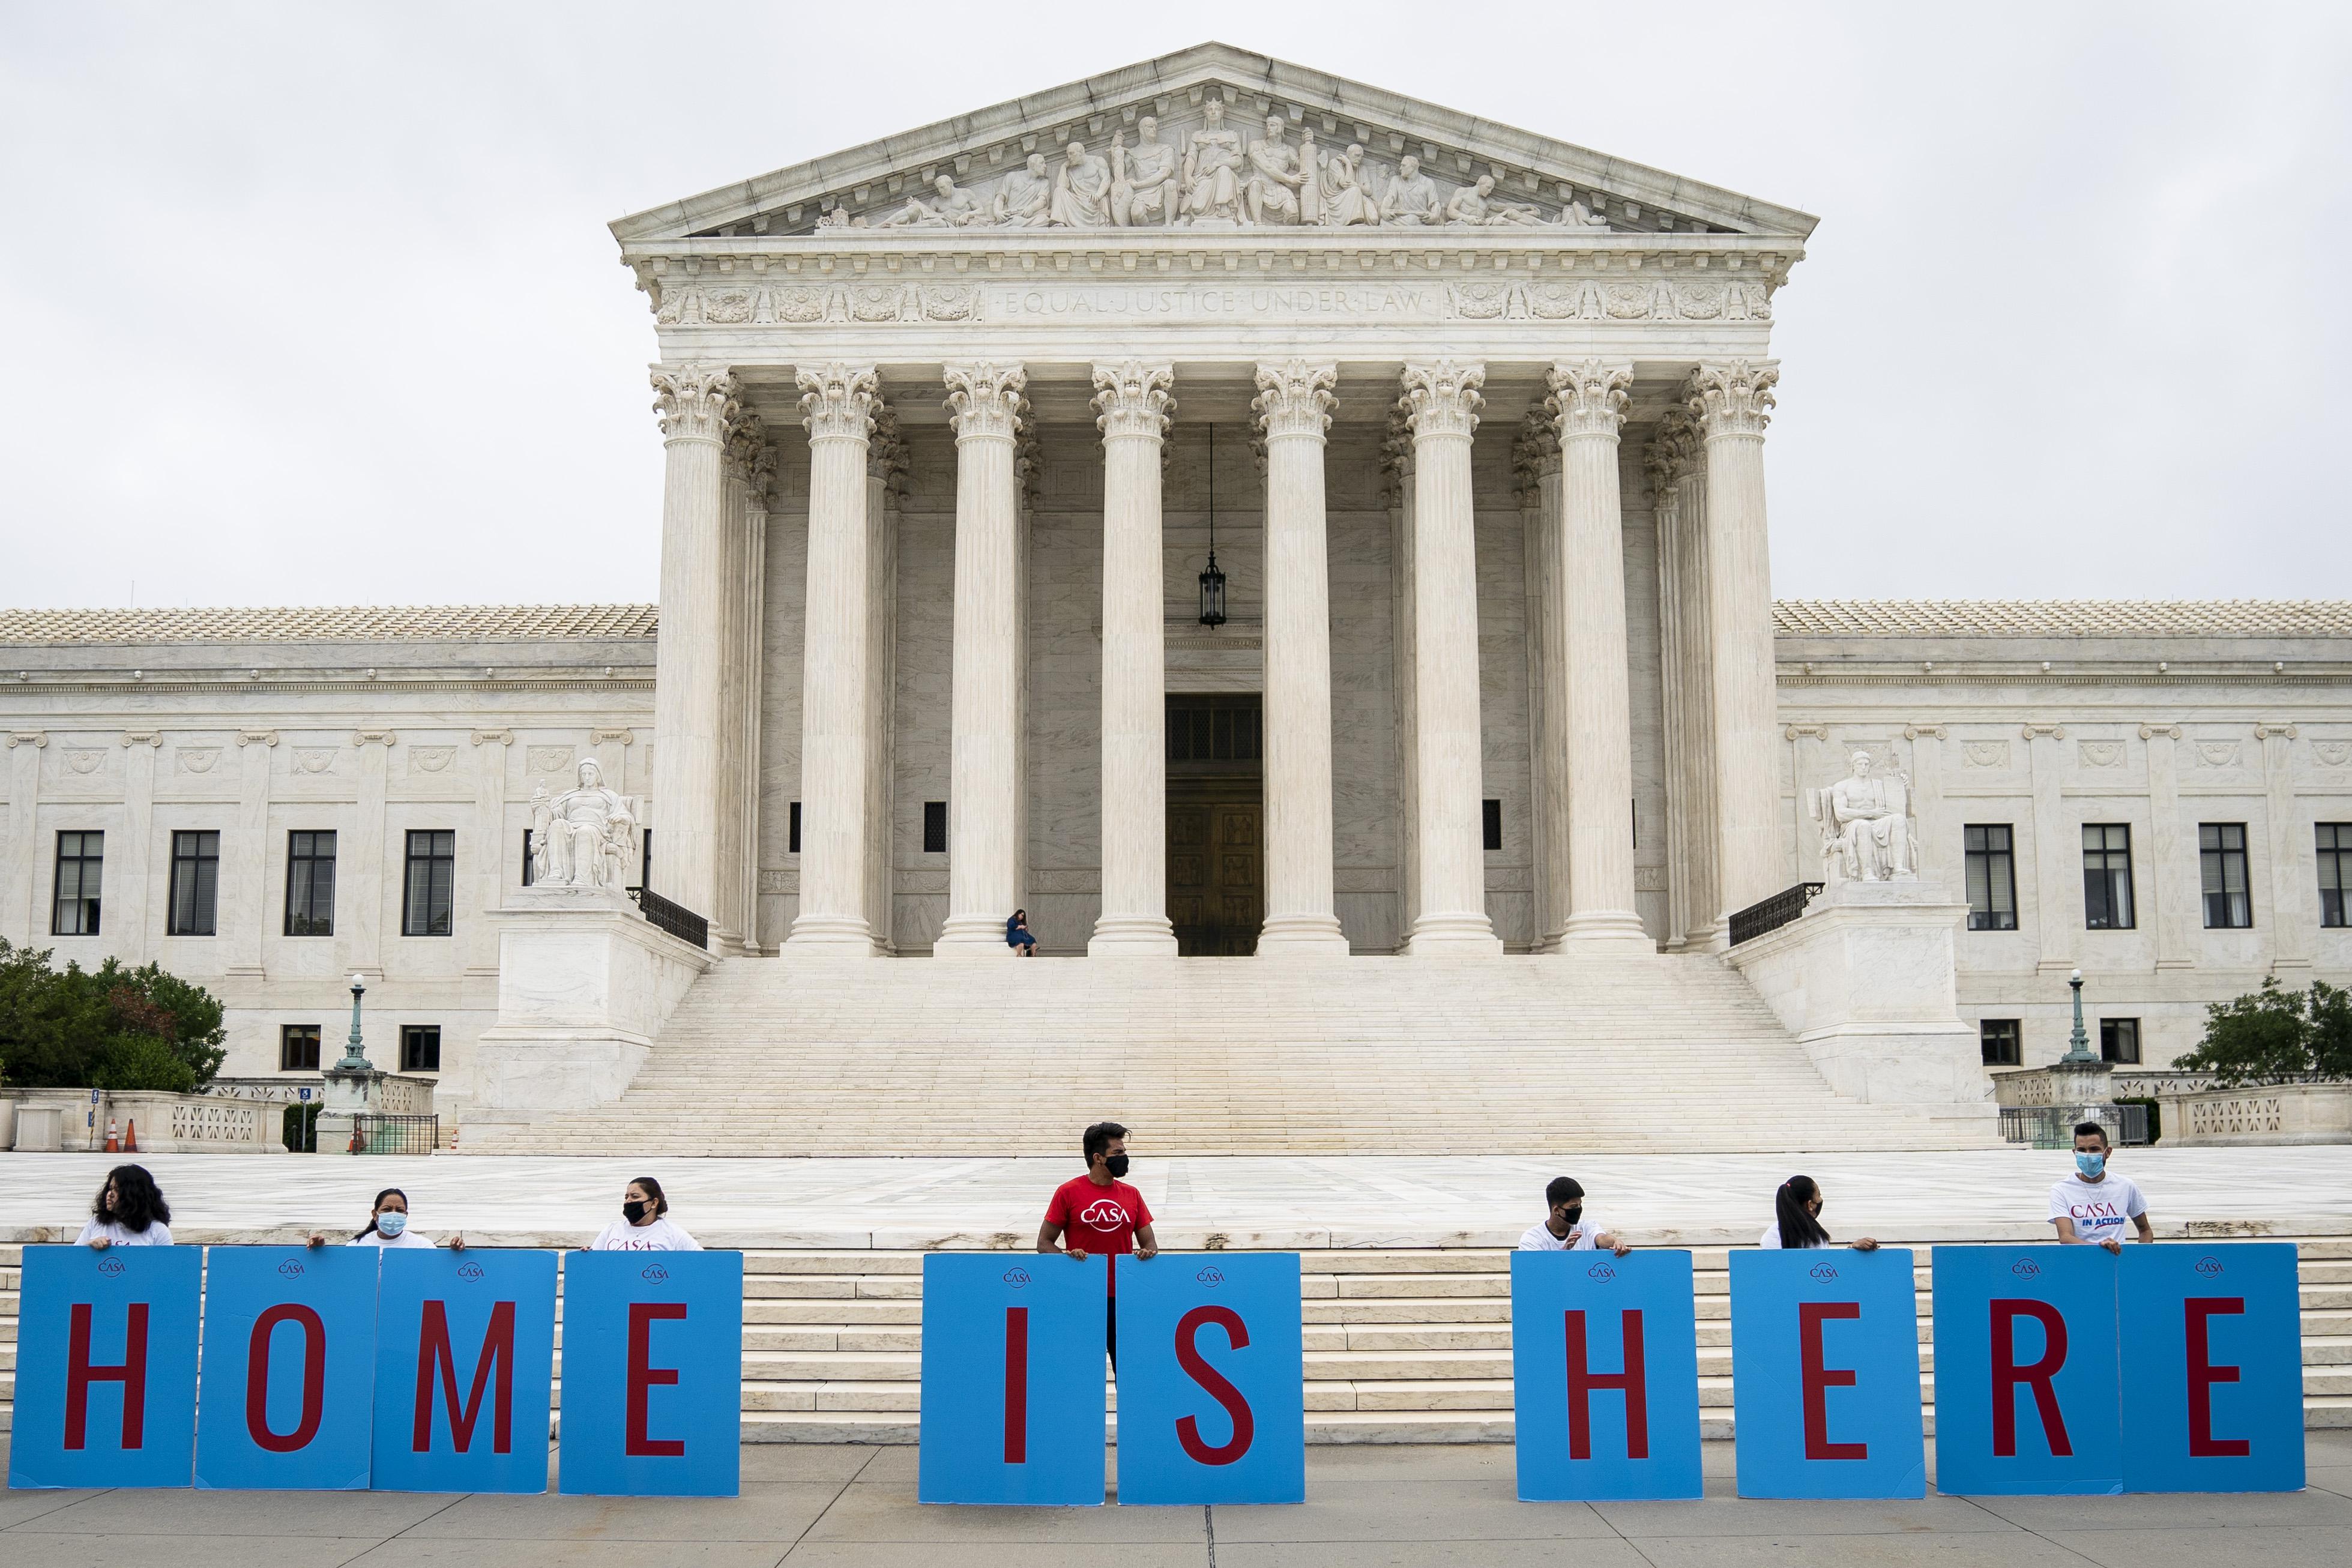 Activists hold signs that together read "Home is here" in front of the Supreme Court building